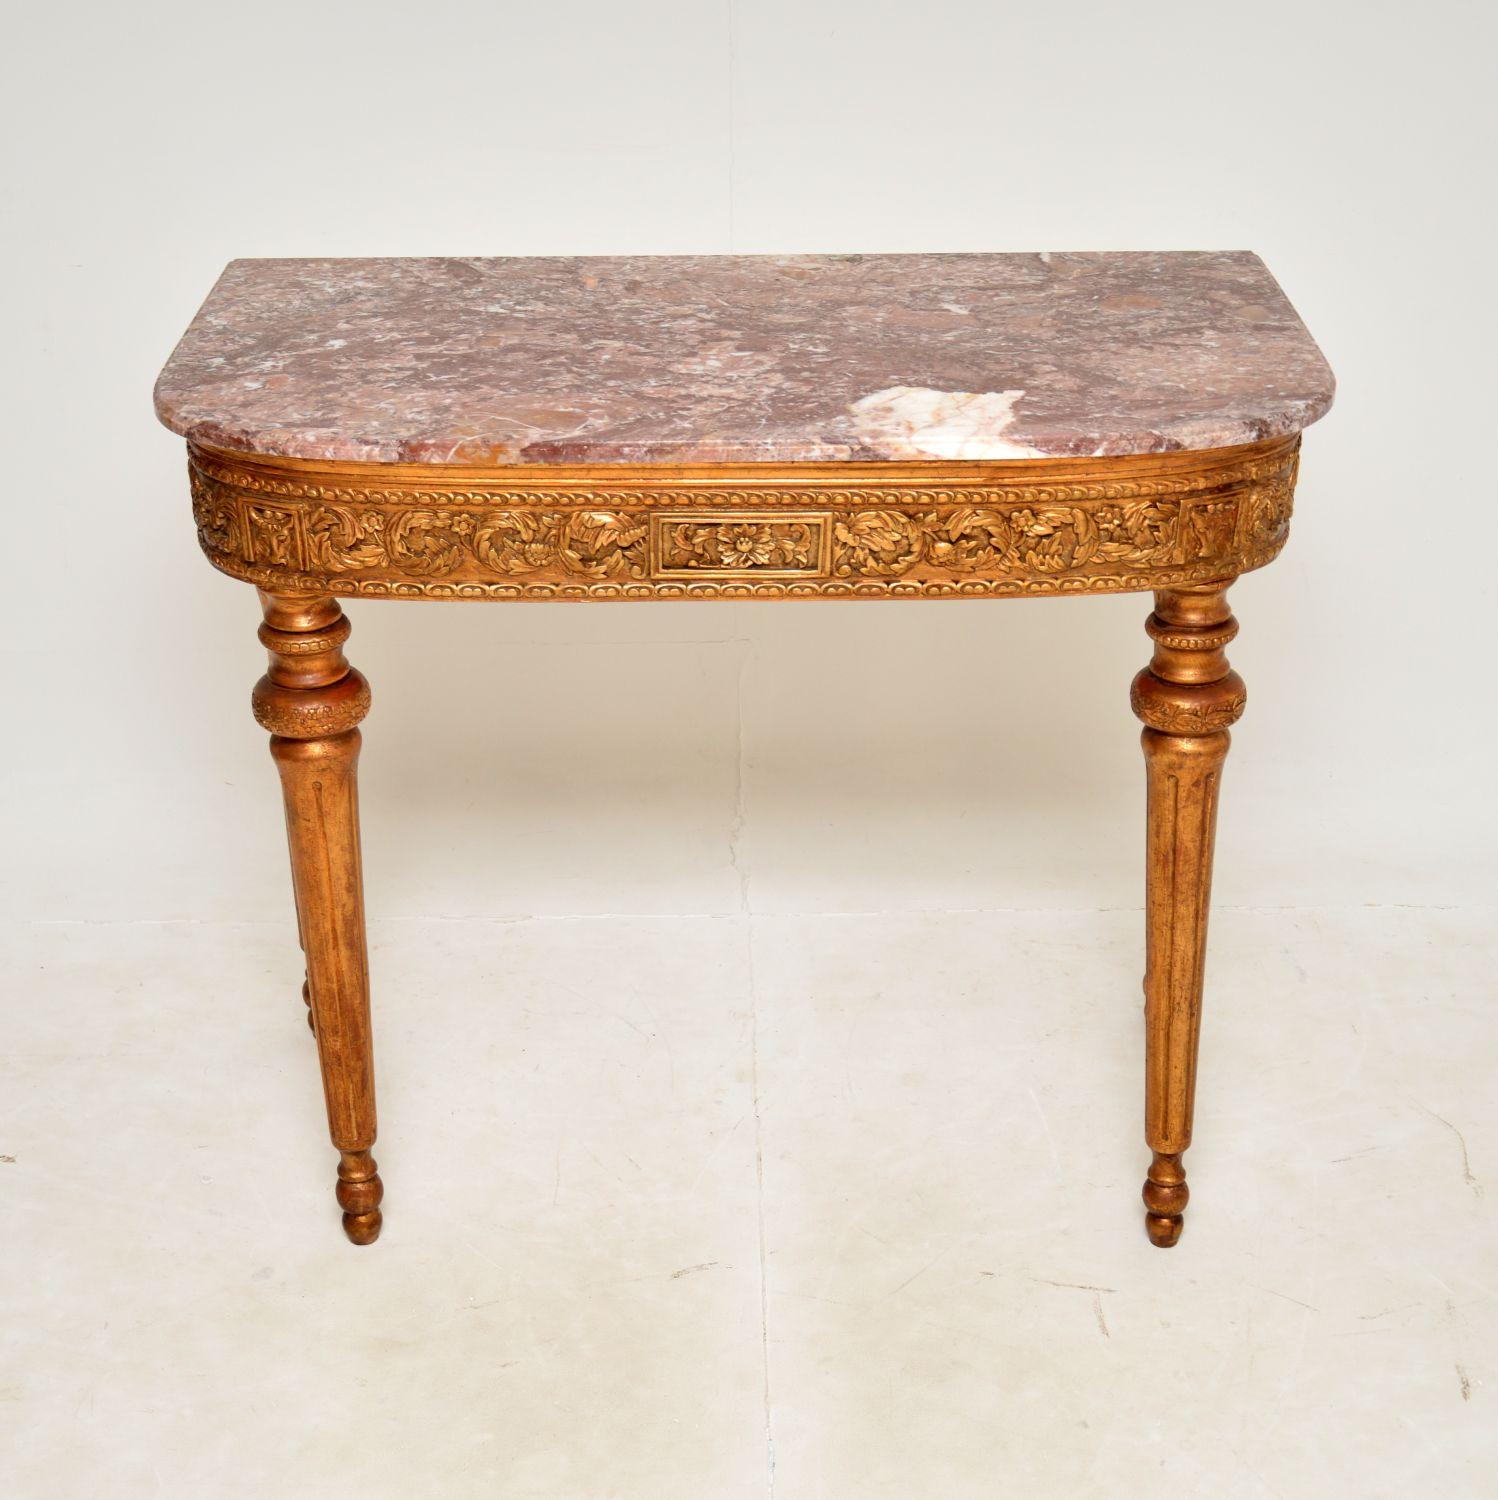 A magnificent antique French giltwood console table with a marble top. This was made in France & I would date it from around the 1900-1920 period.

It is of outstanding quality and is extremely impressive. It is a great size, the giltwood frame has